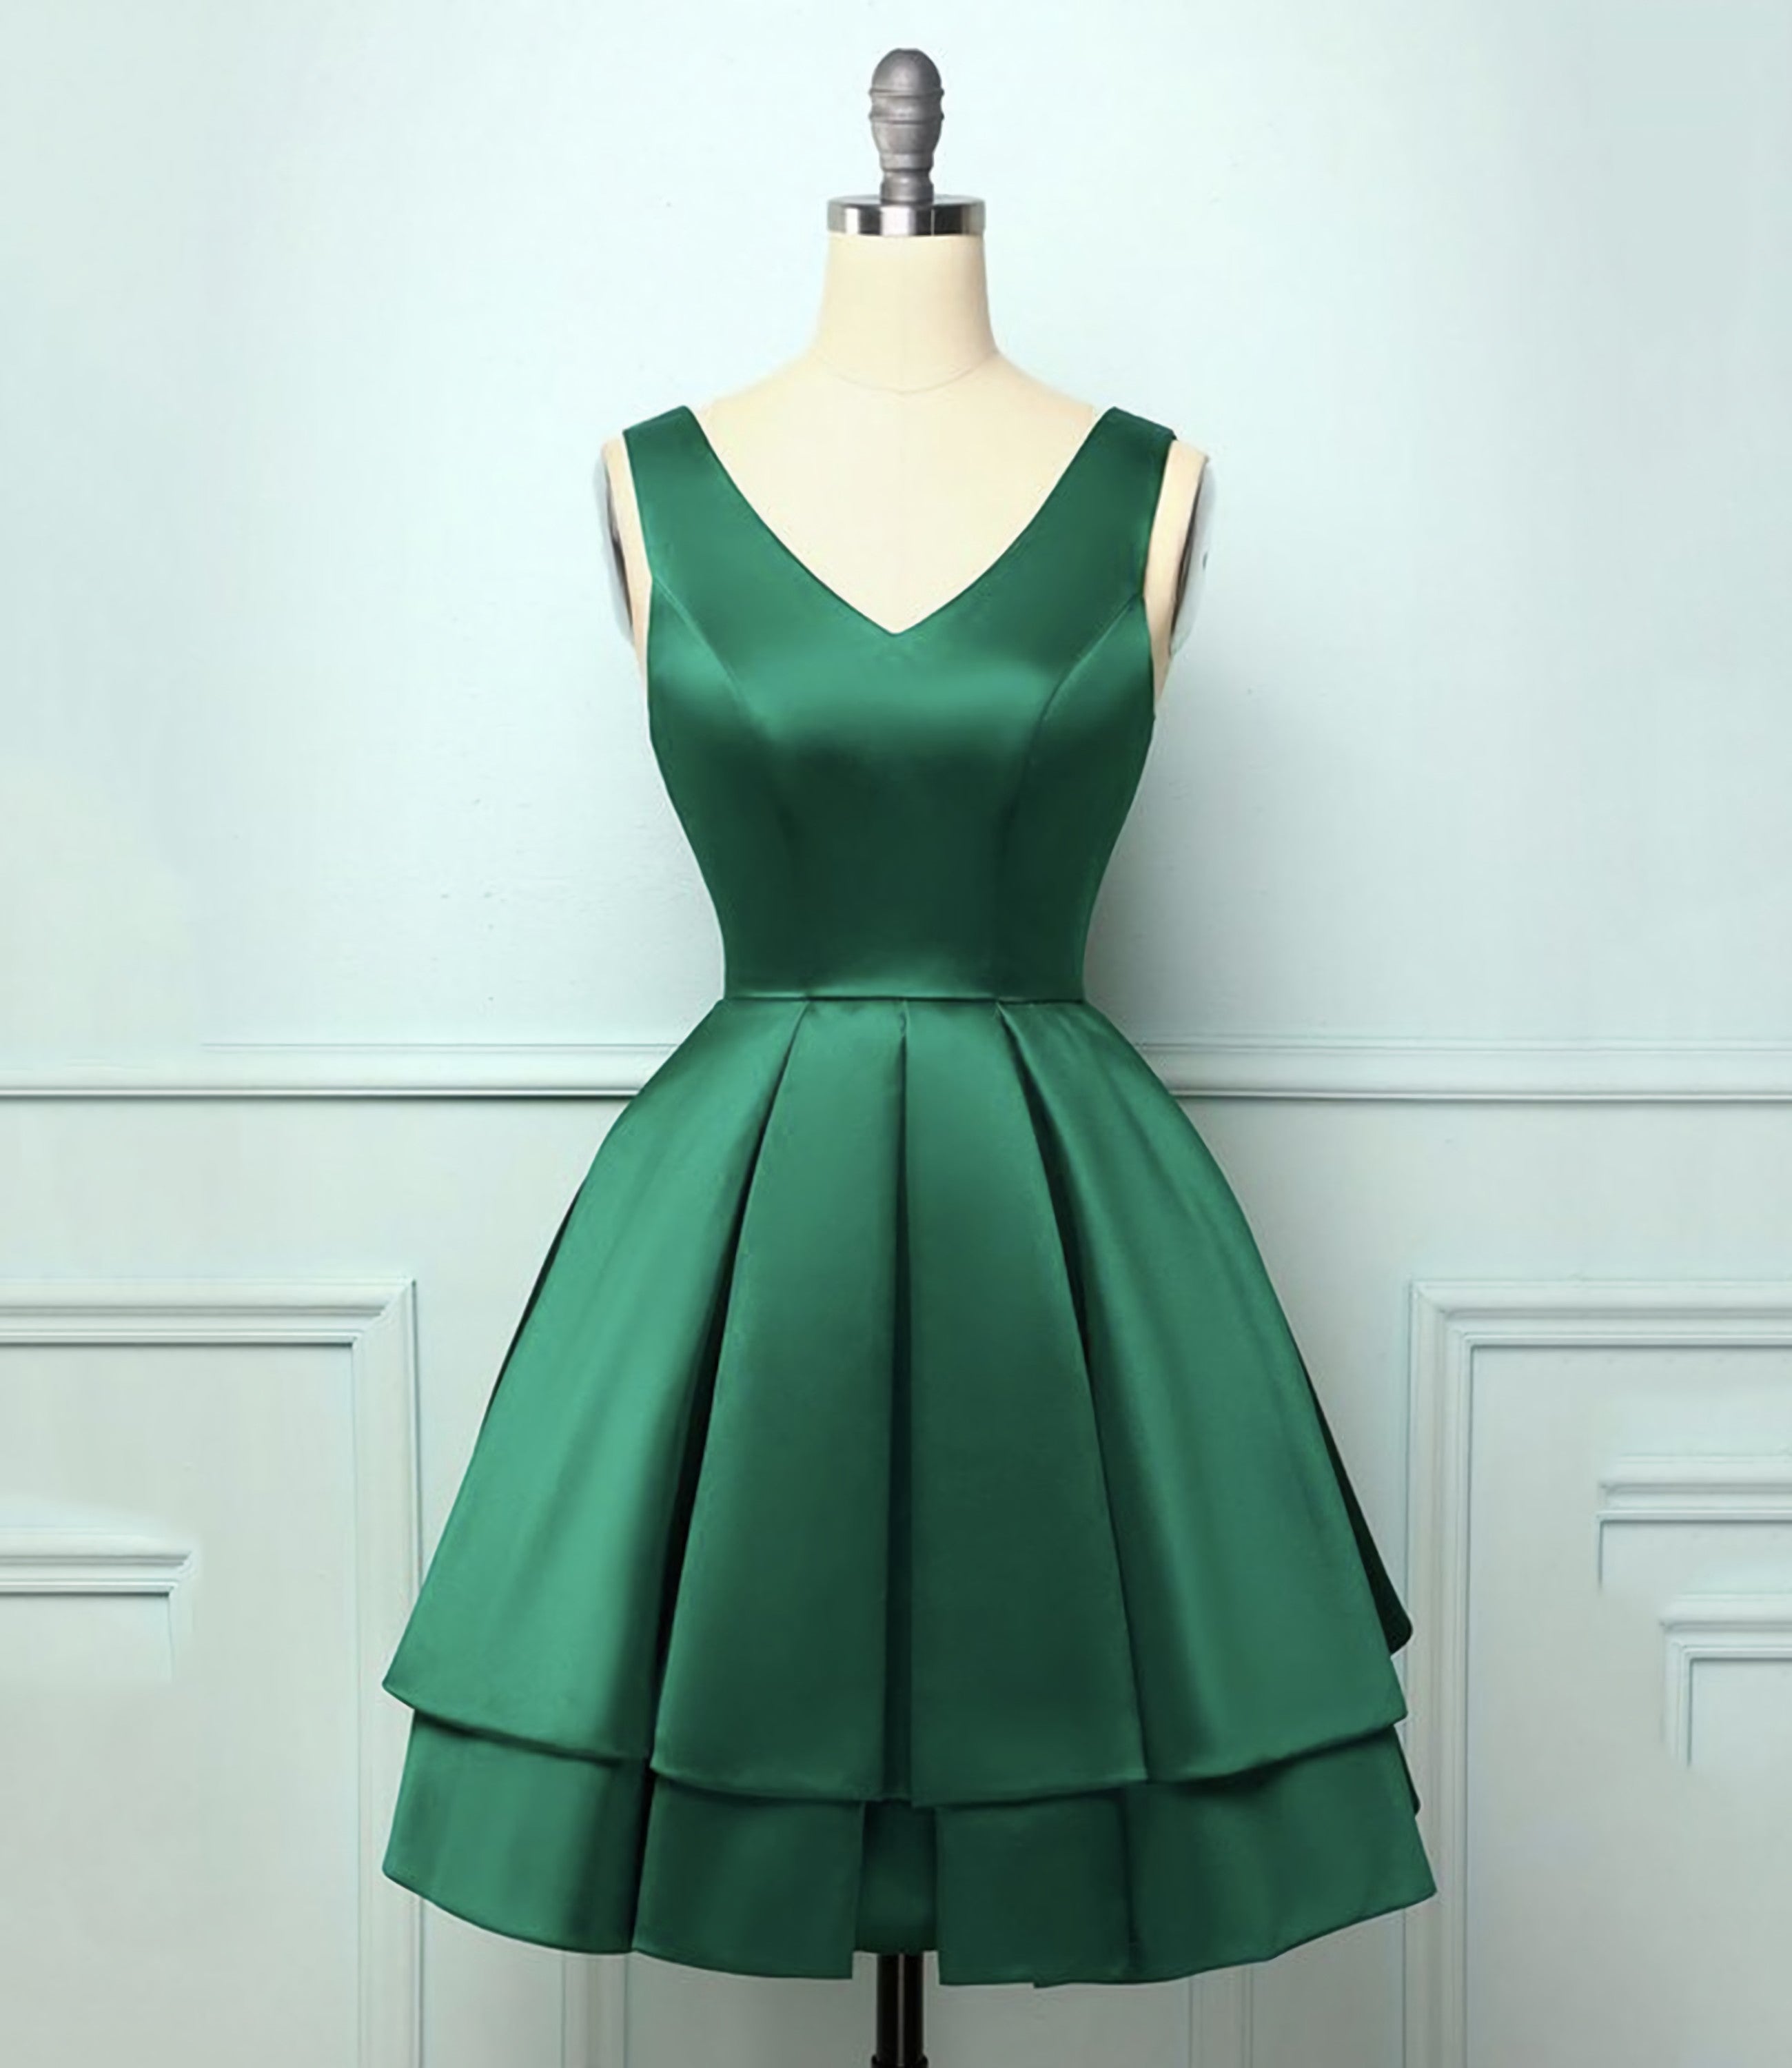 Green Satin Short Corset Homecoming Dress outfit, Prom Dress Colors